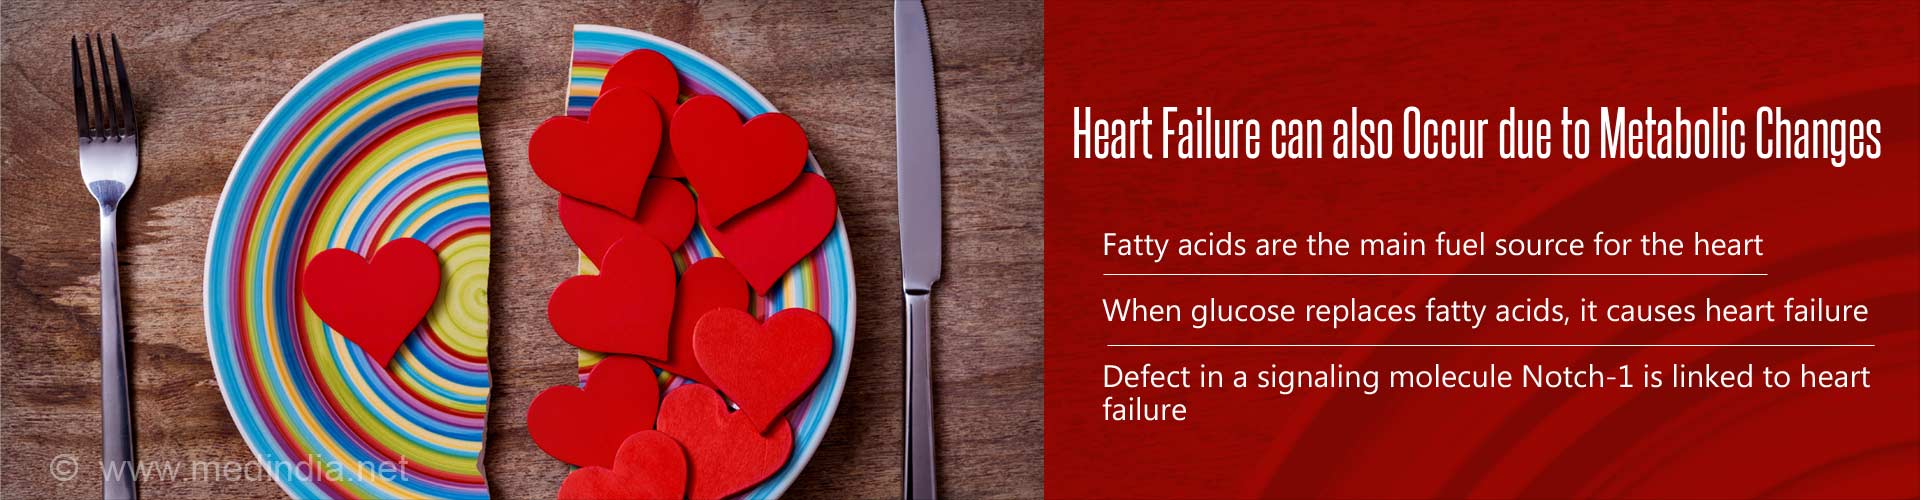 heart failure can also occur due to metabolic changes
- fatty acids are the main fuel source for the heart
- when glucose replaces fatty acids, it causes heart failure
- defect in a signaling molecule Notch-1 is linked to heart failure